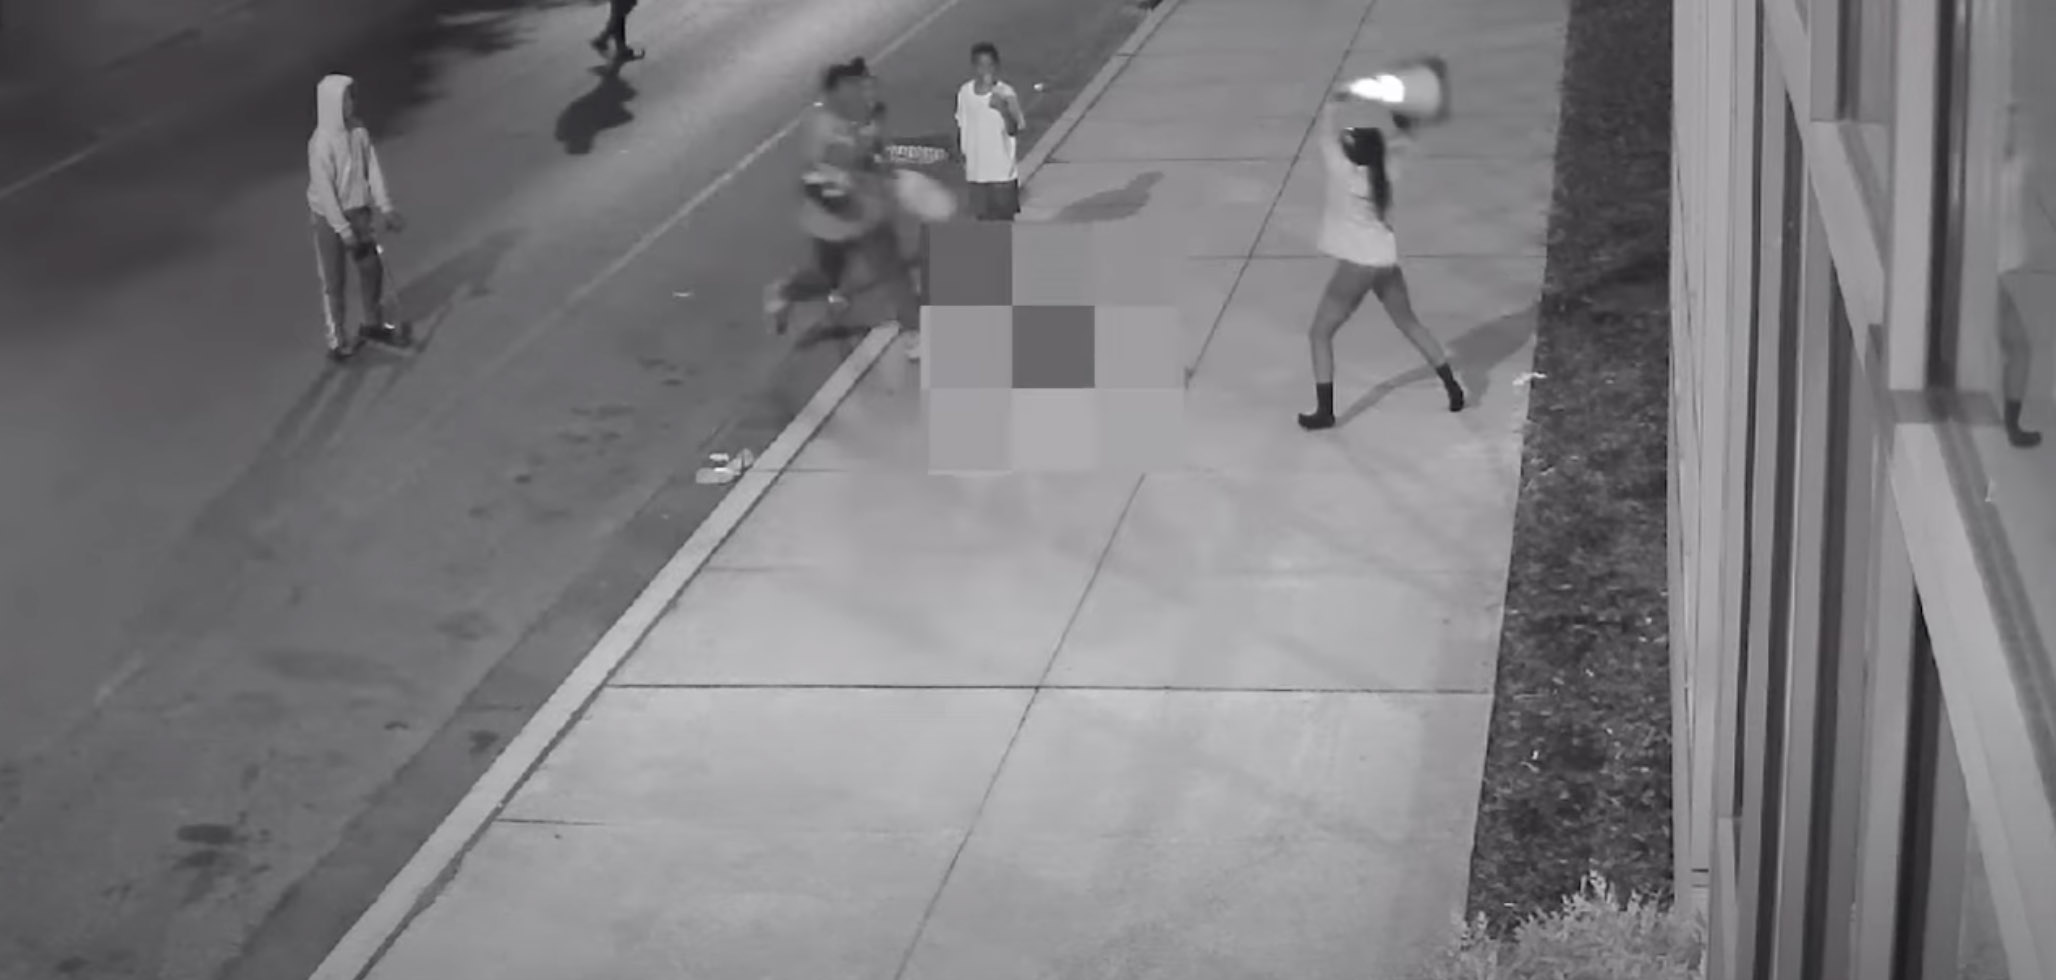 PHOTO: Philadelphia police released surveillance video of a deadly attack, which occurred on June 24, 2022.